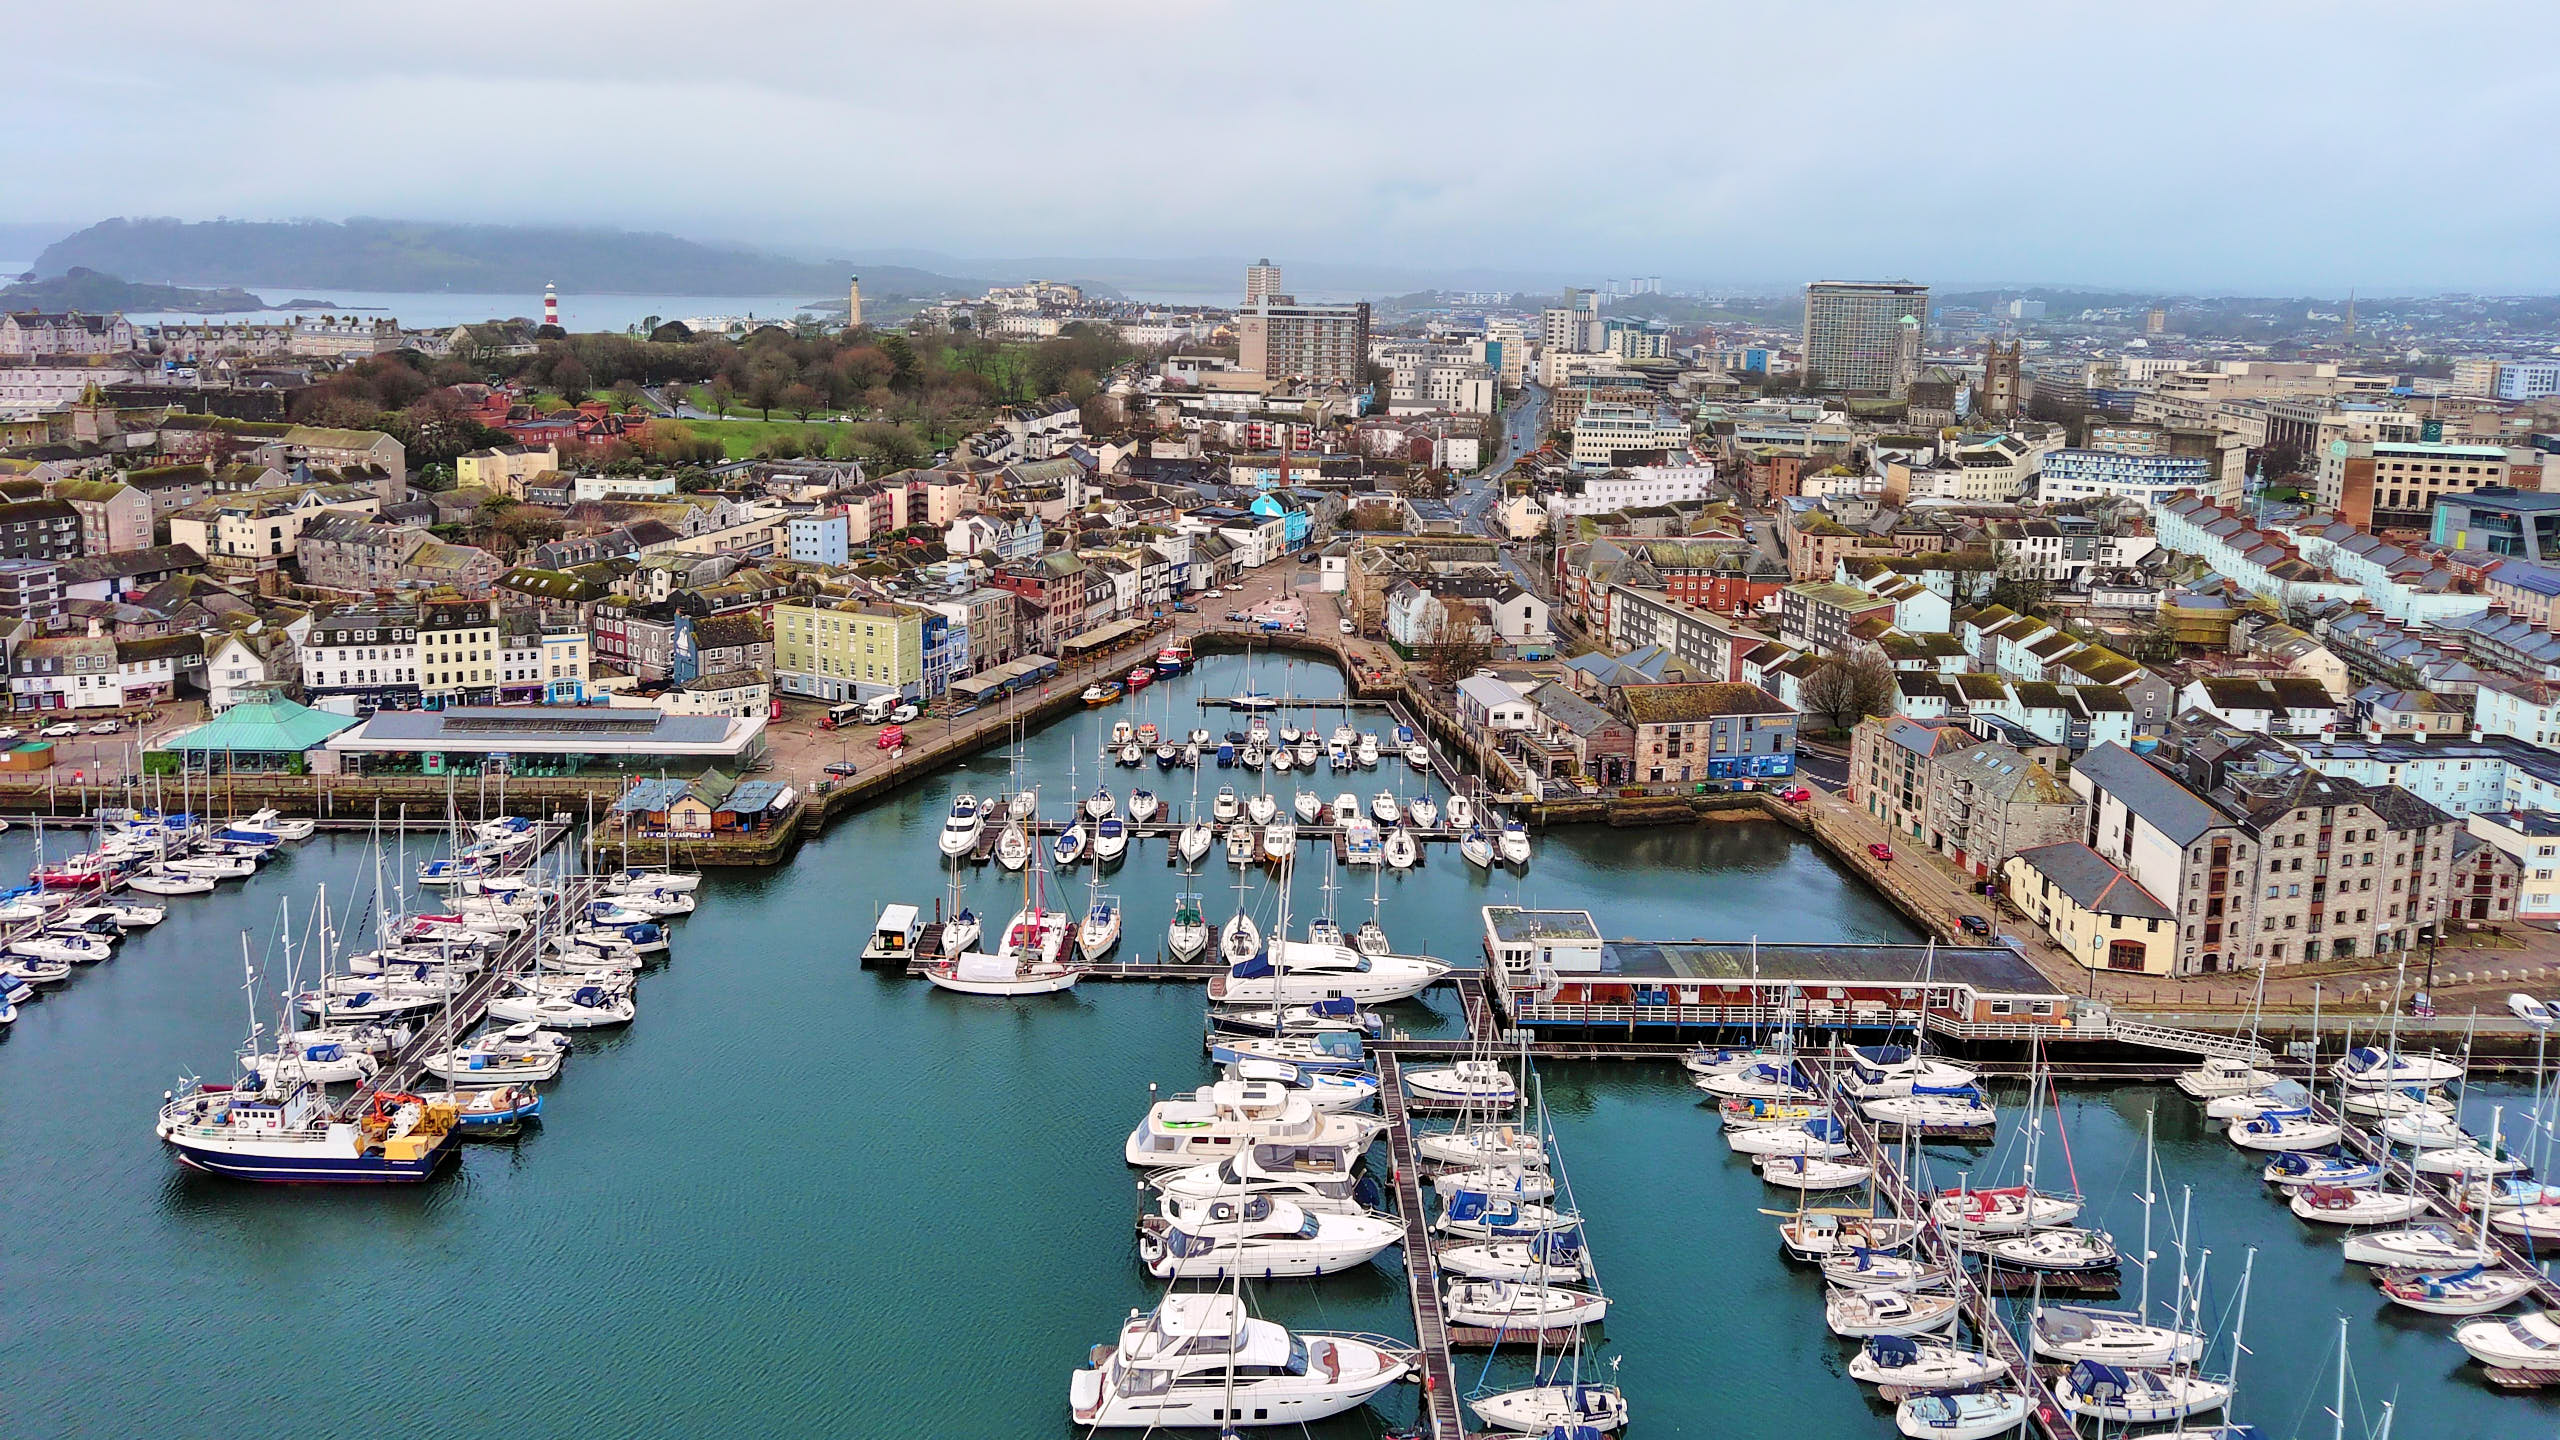 View over Plymouth marina with Smeaton's tower visible in the background